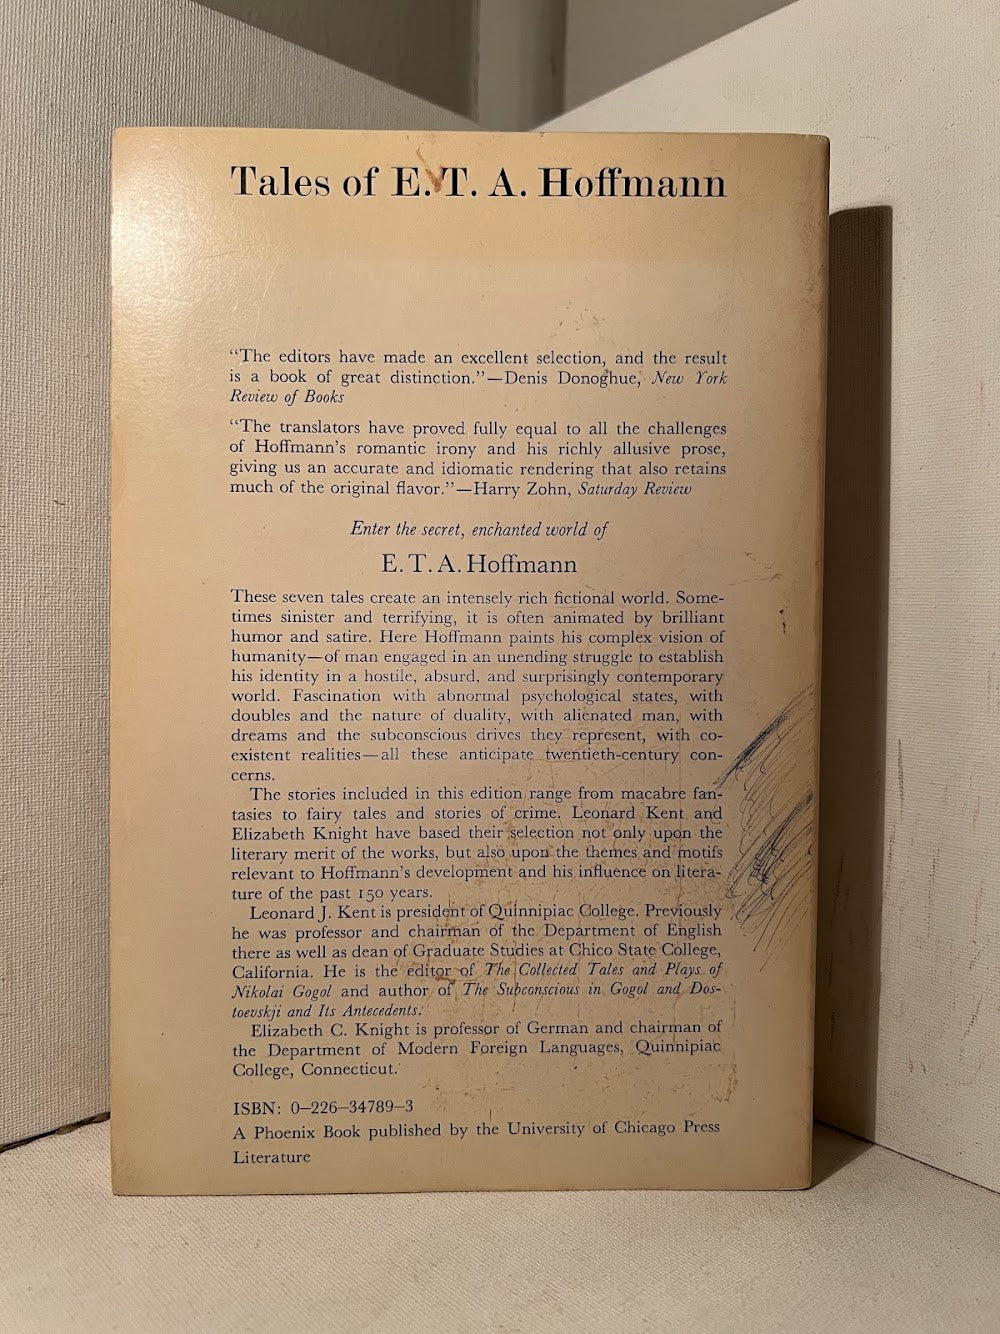 Tales of E.T.A. Hoffman edited and translated by Leonard J. Kent & Elizabeth C. Knight